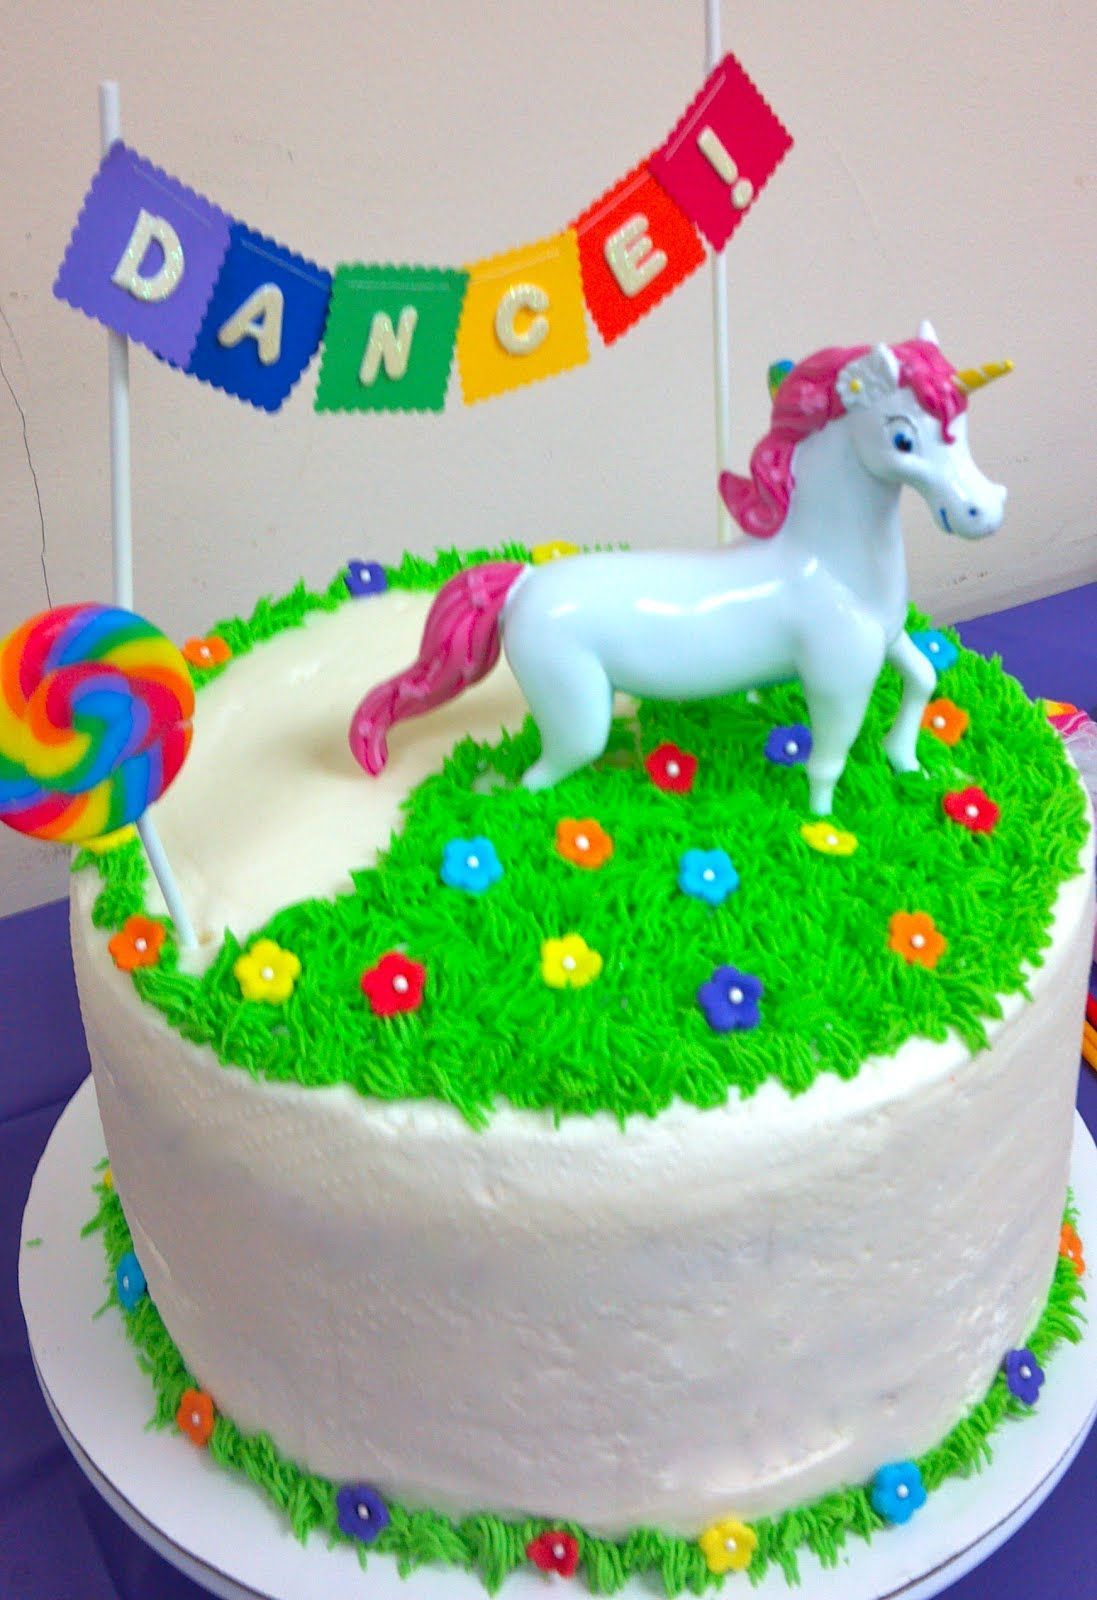 Rainbow (and Unicorn) Cake  I would have loved this cake as a kid!!!  It still makes me smile!